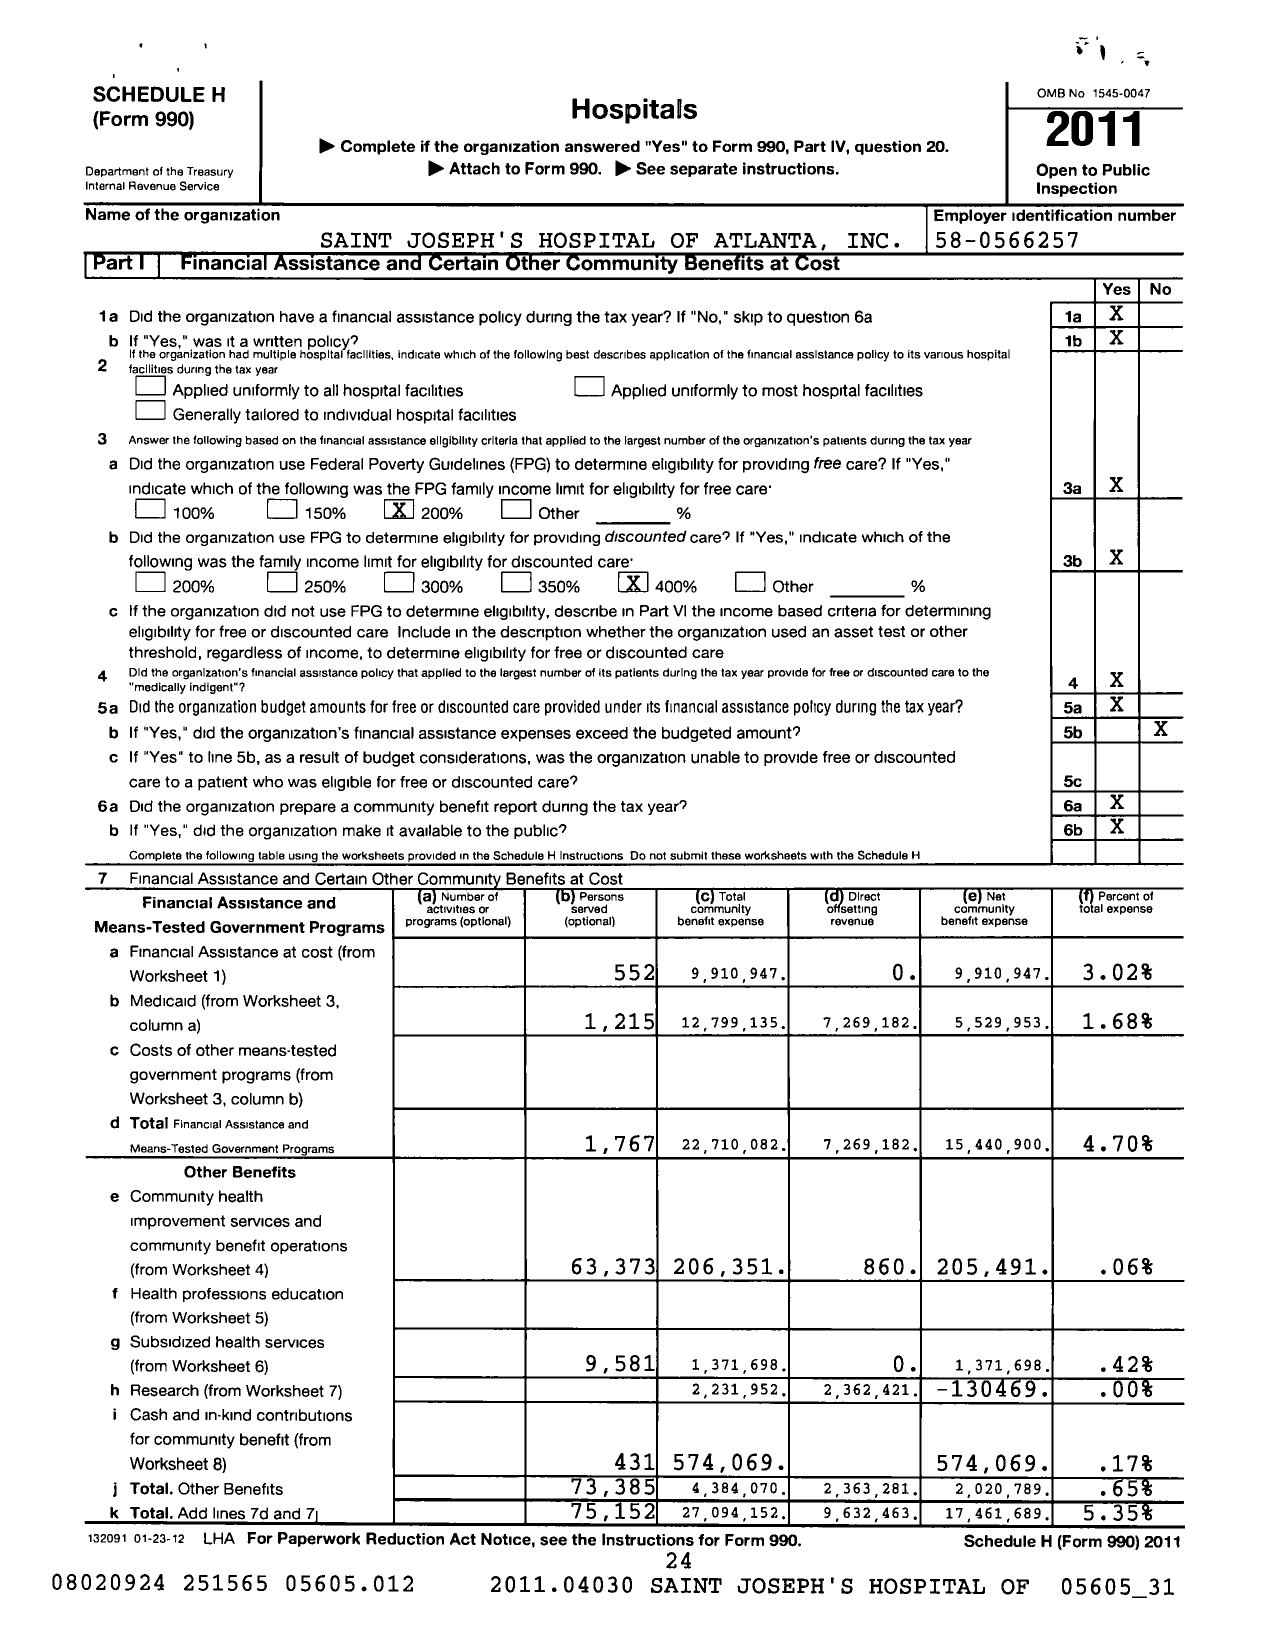 Image of first page of 2011 Form 990R for Saint Joseph's Hospital Atlanta